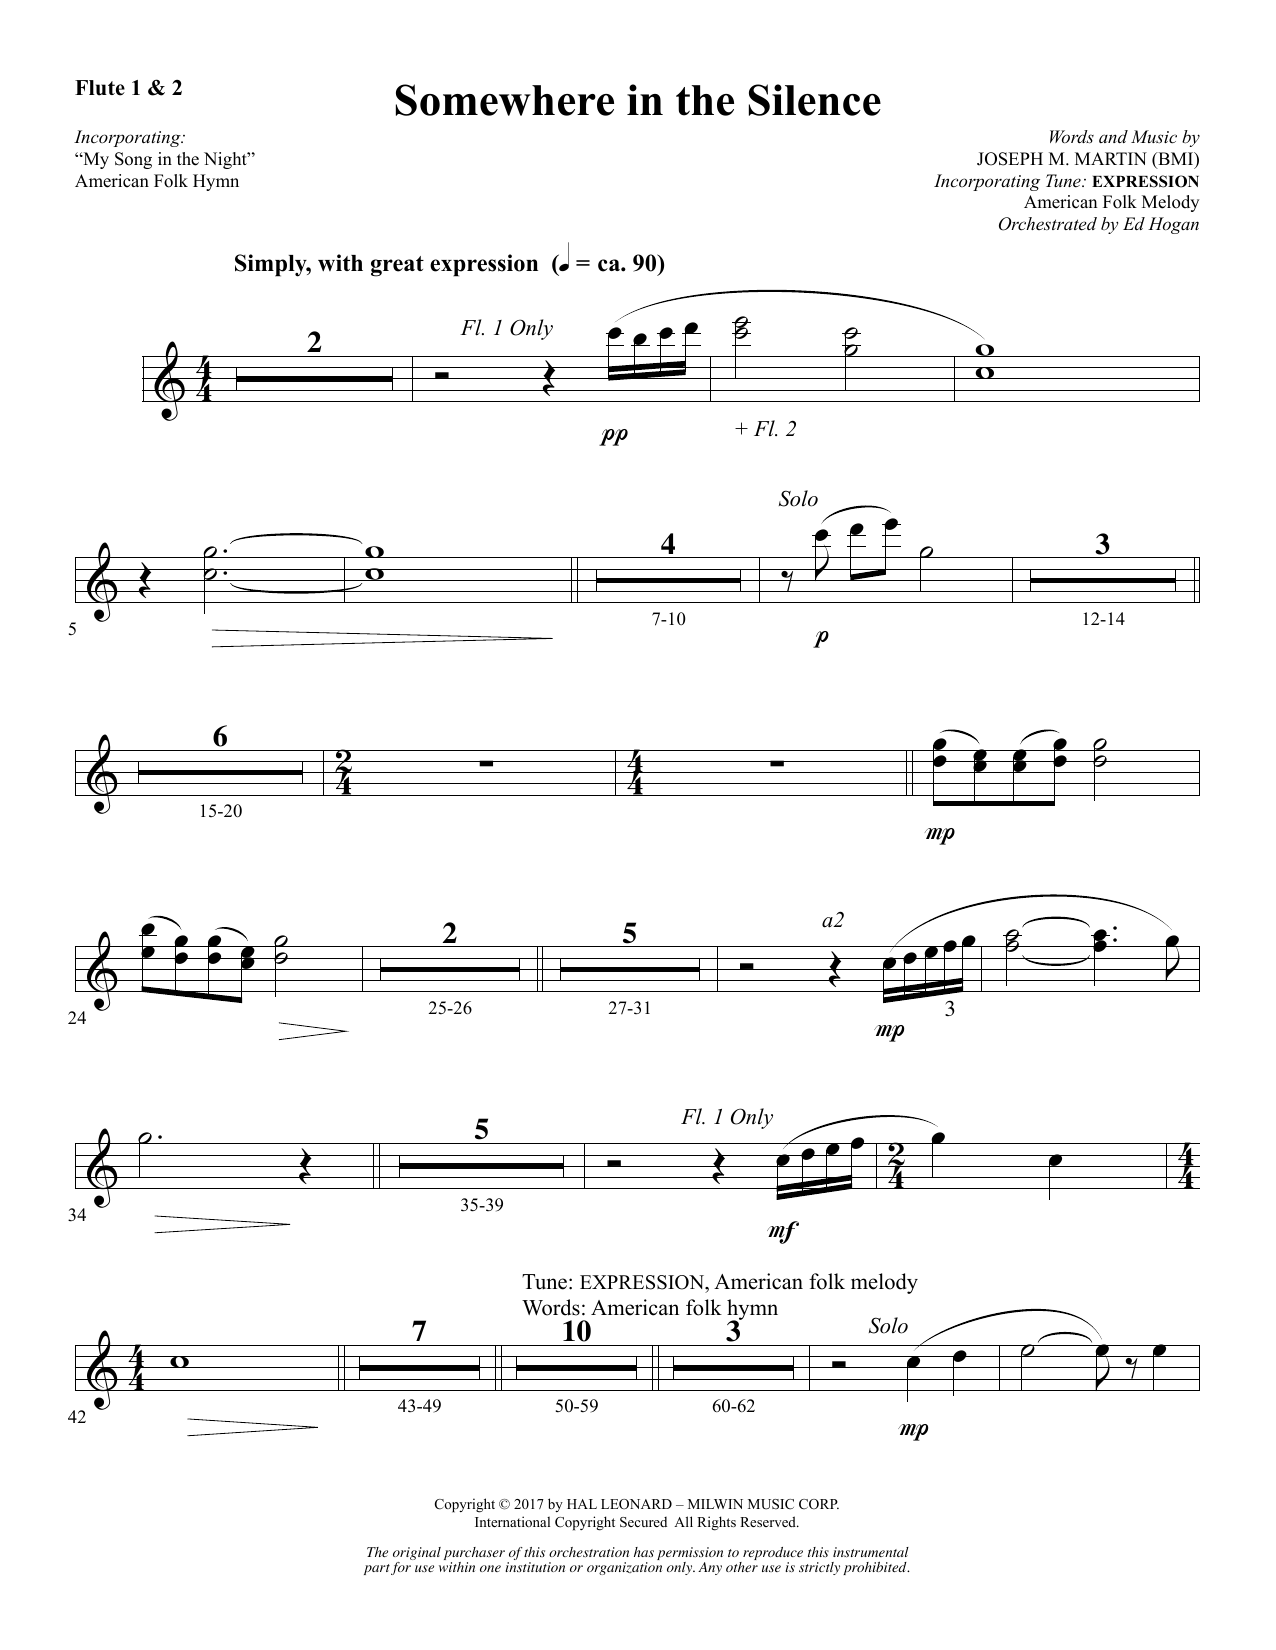 Download Joseph M. Martin Somewhere in the Silence - Flute 1 & 2 Sheet Music